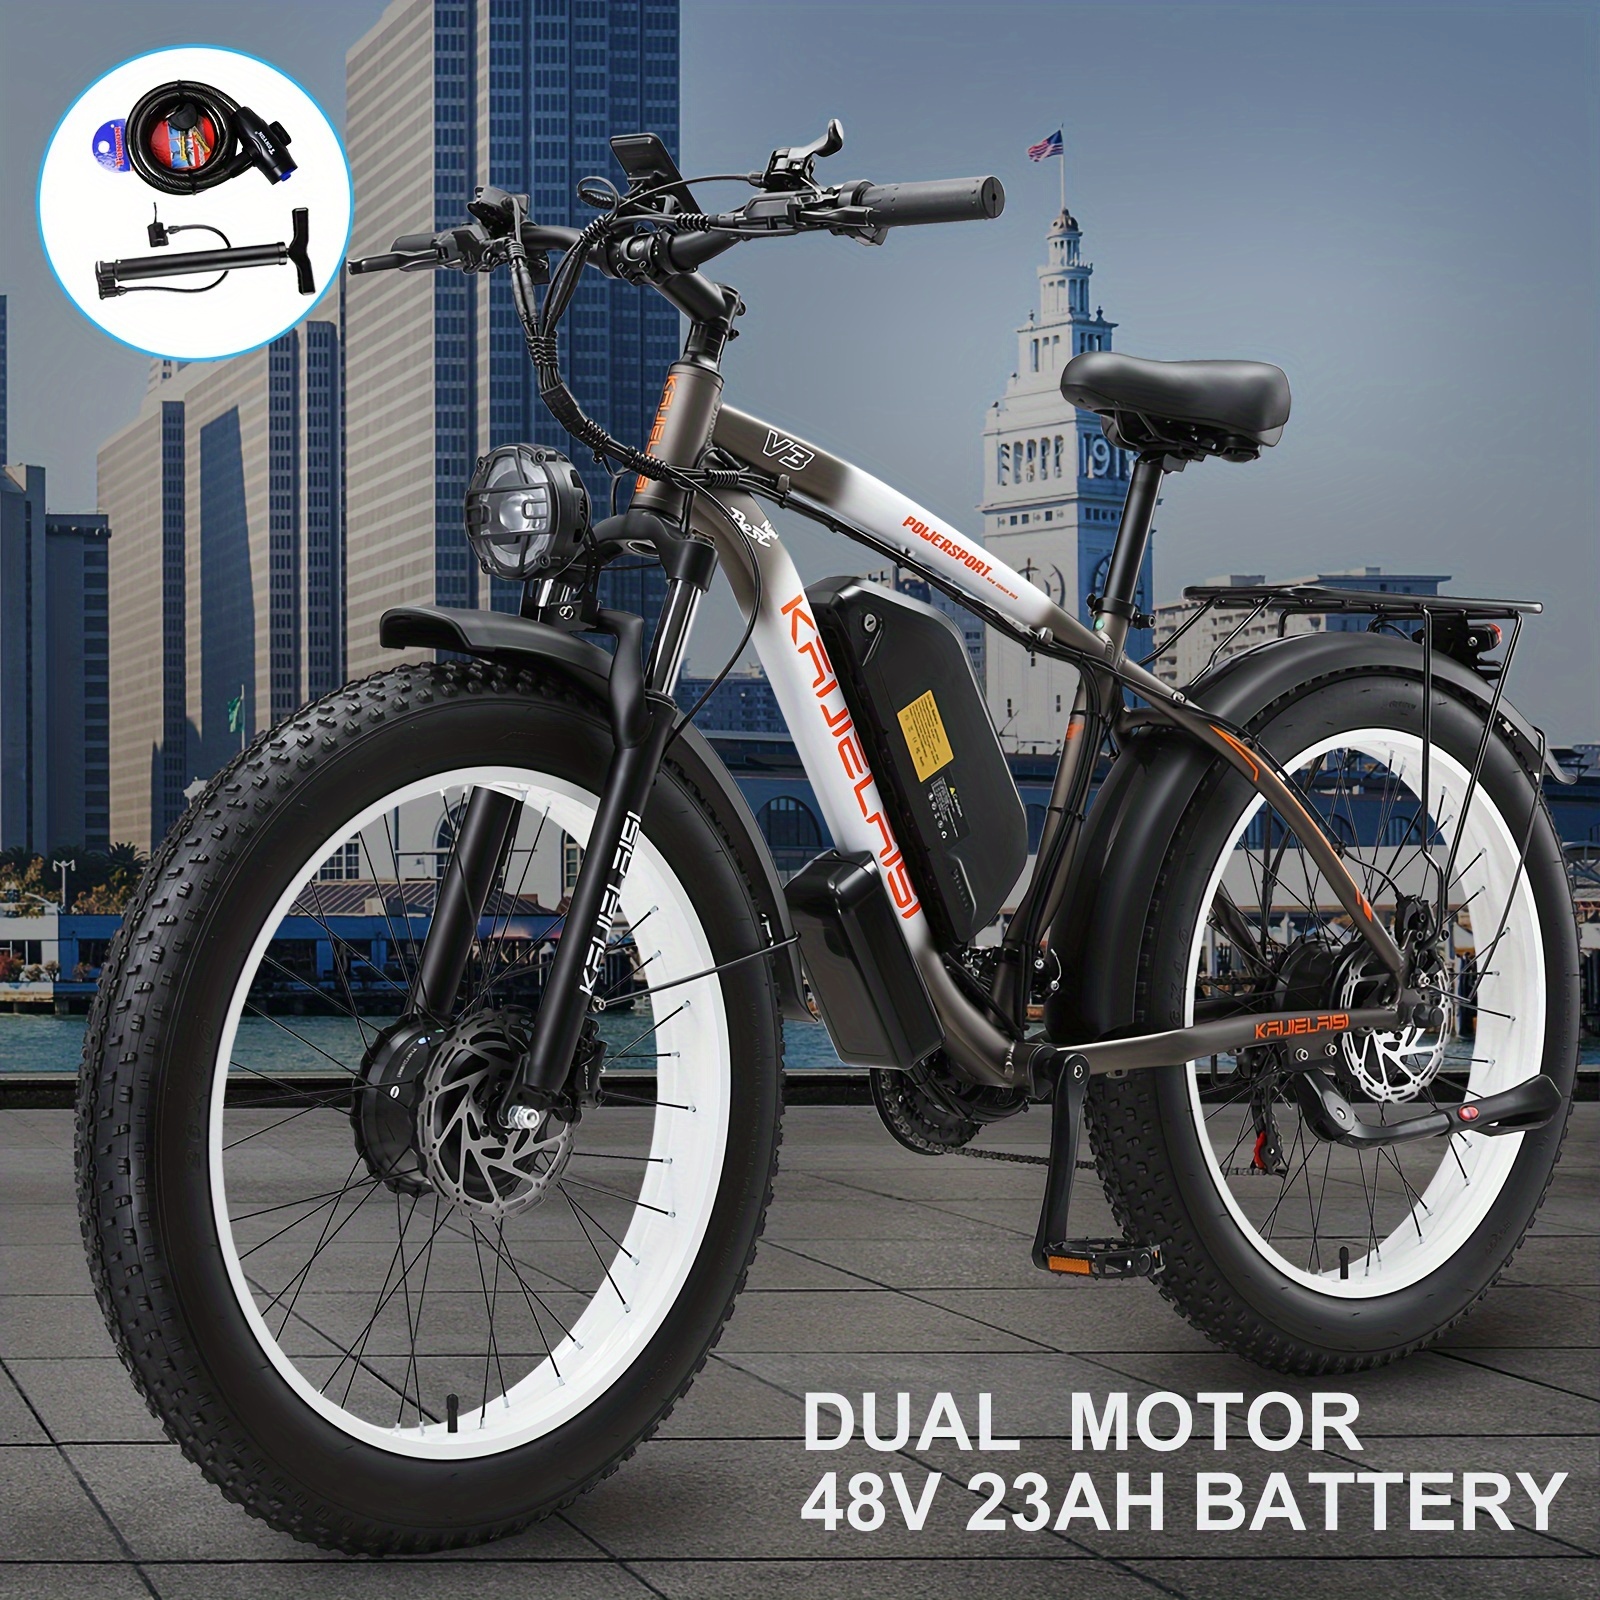 

48v 23ah 1104wh Removable Battery 26 Fat Tire Electric Bike For Adults - Dual Motor Electric Mountain Commuter Snow Bike With Up To 50 Miles Range - Keteles All-terrain Ebike For Front Position Riding